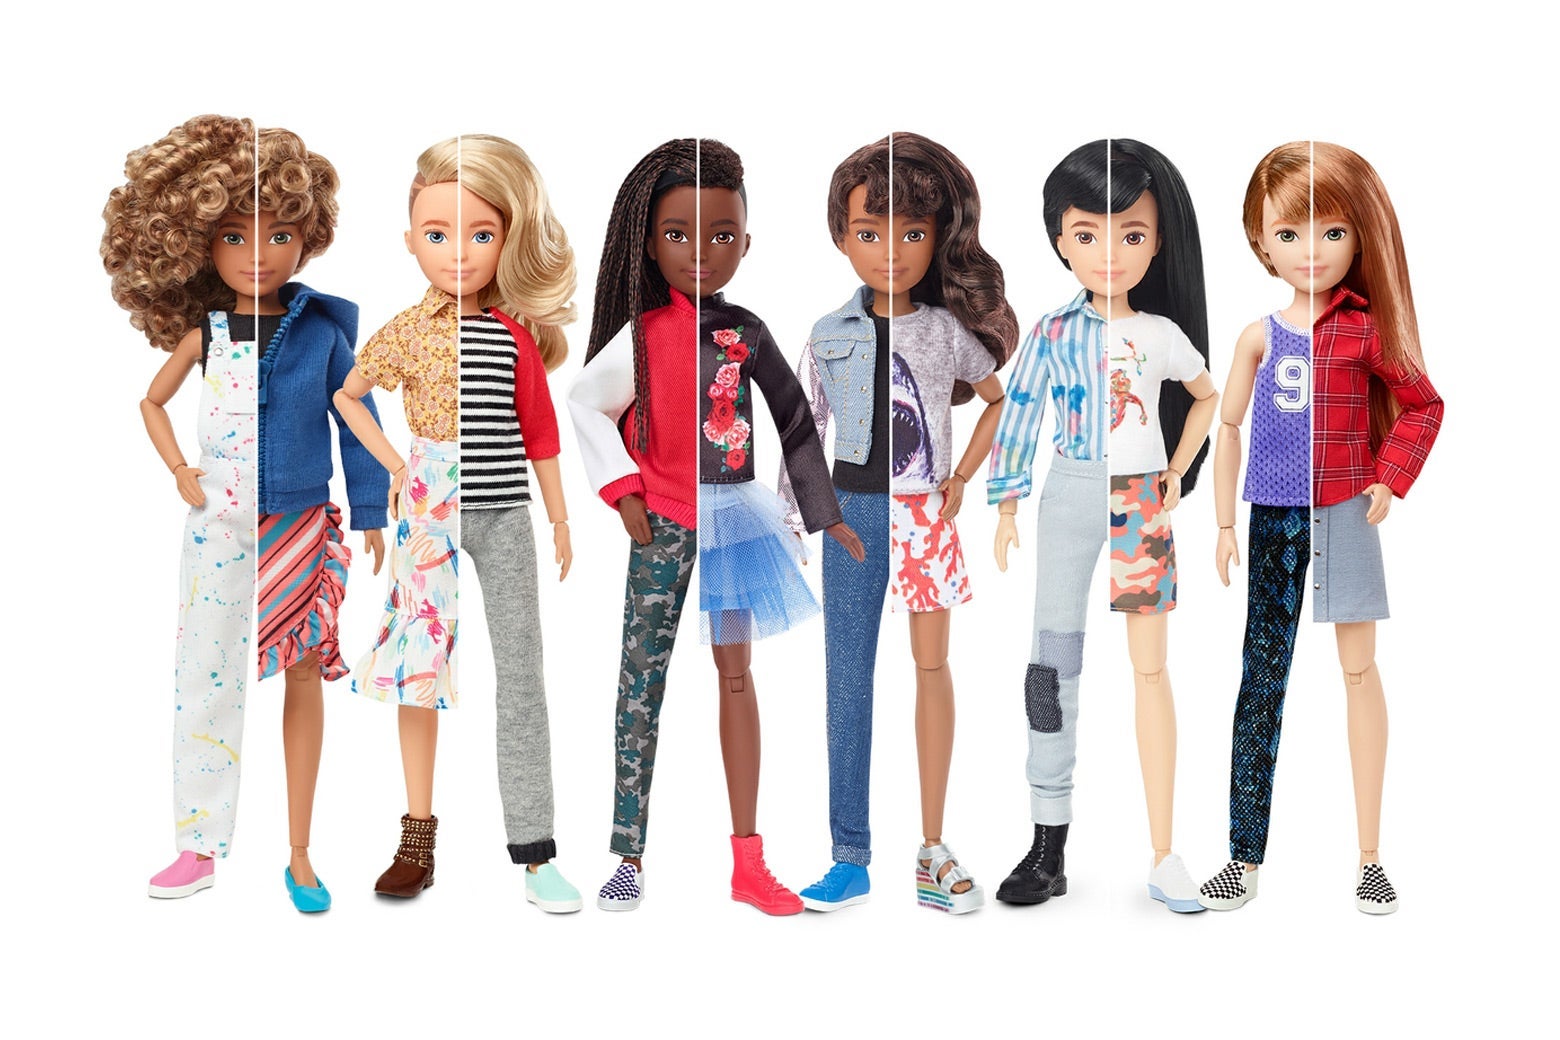 The Creatable World lineup from Mattel